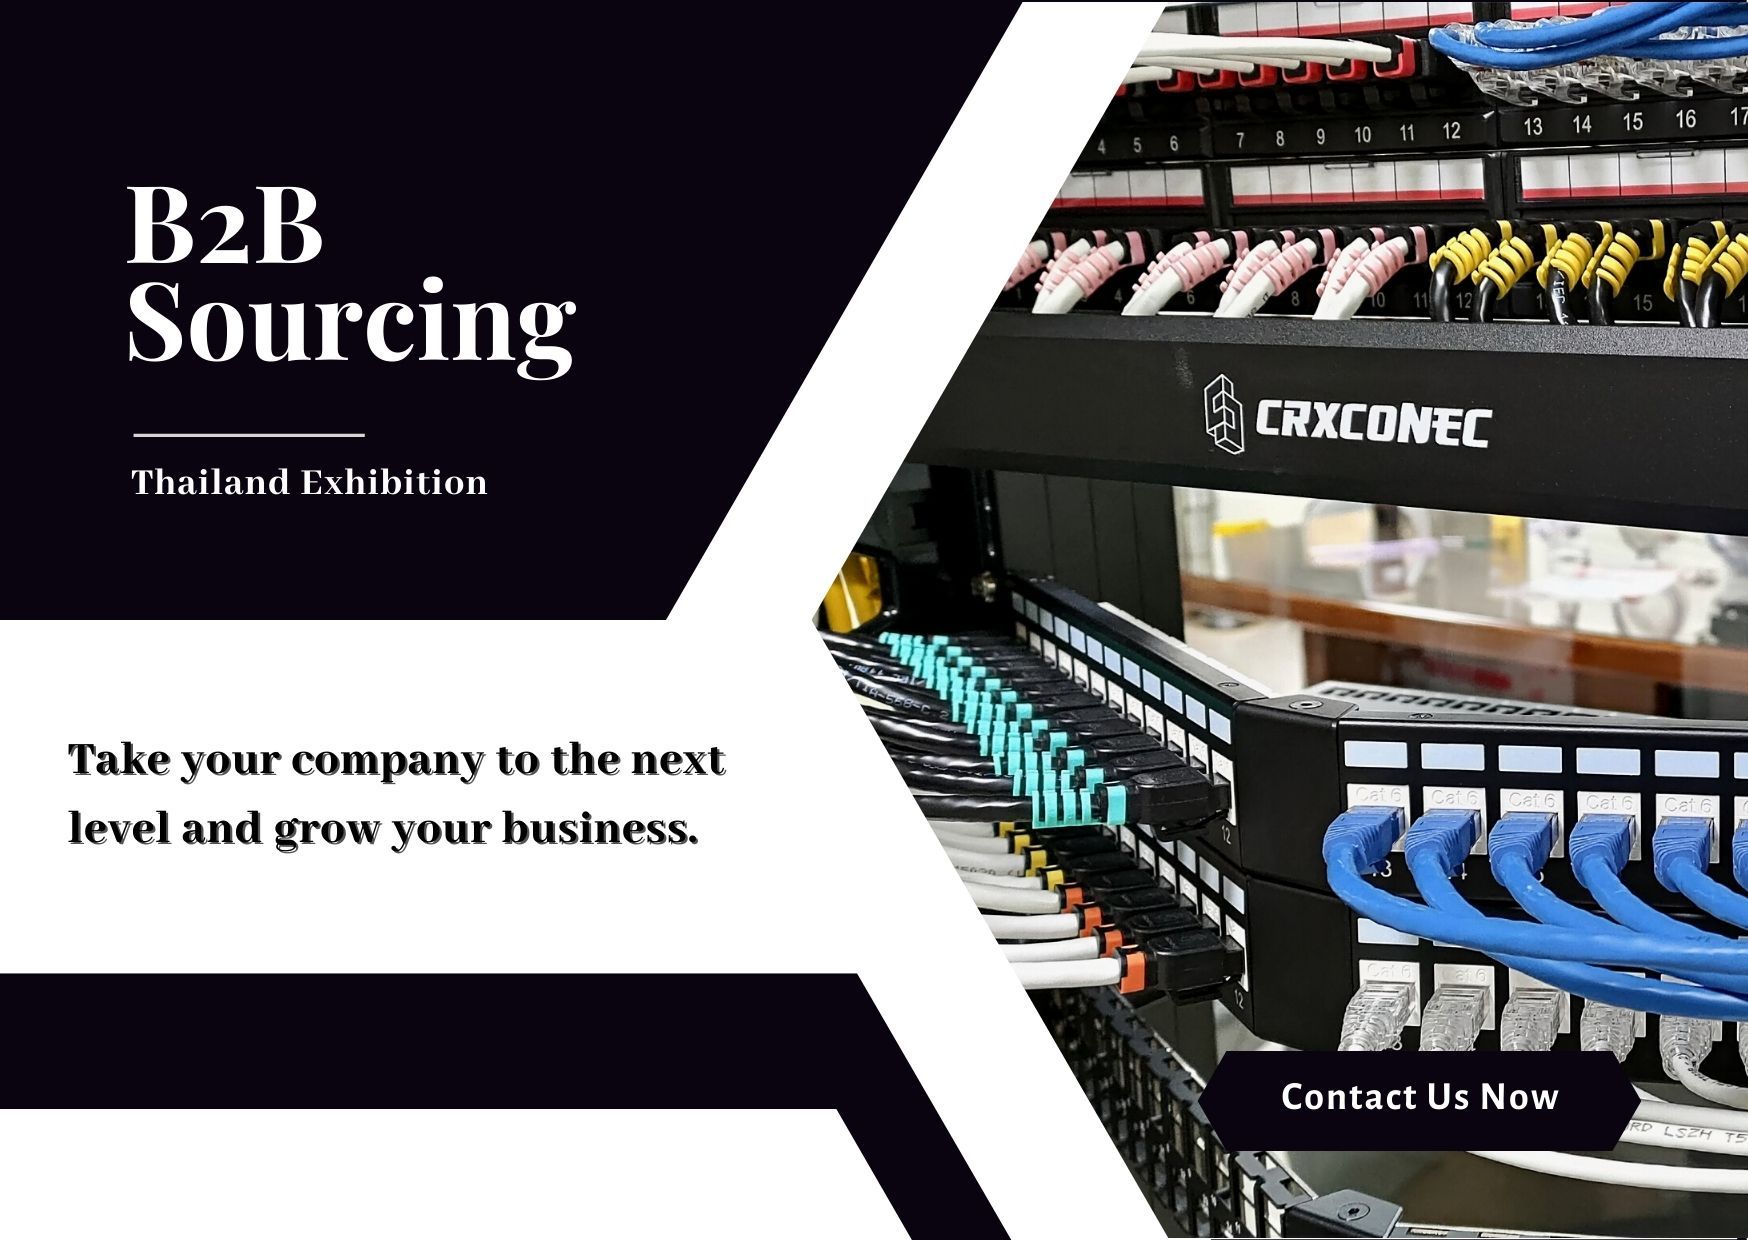 End-to-end cabling solution product demonstration to DigiTech ASEAN Thailand exhibition. If you are going to participate this event, sincerely welcome you to join us !